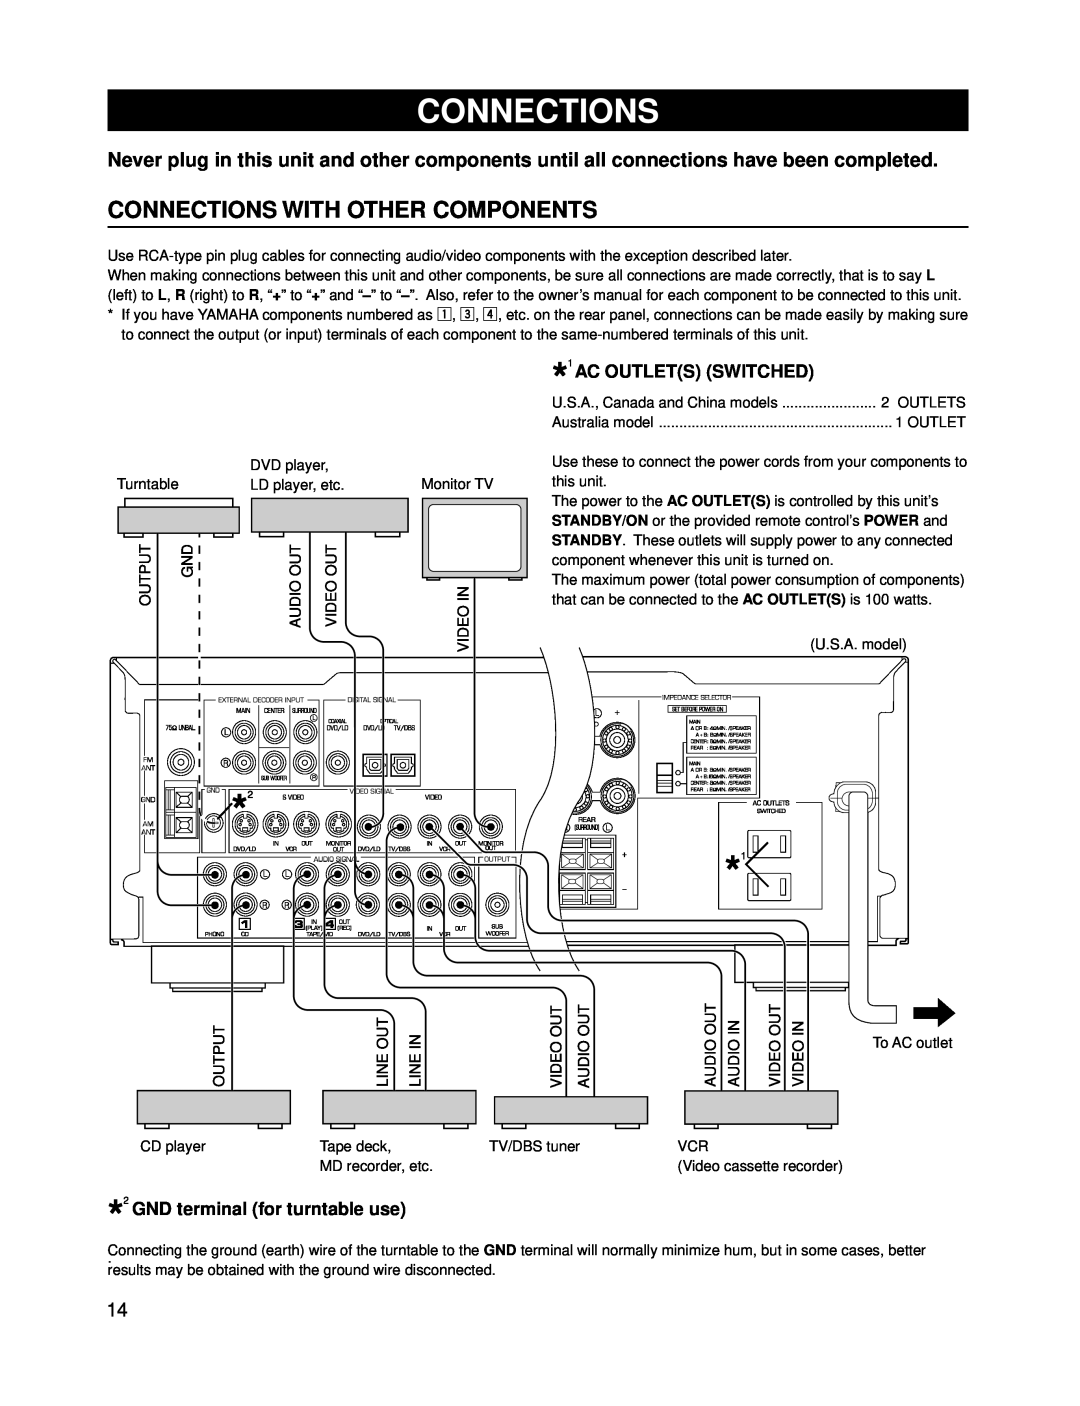 Yamaha RX-V595A owner manual Connections With Other Components, Ac Outlets Switched, GND terminal for turntable use 